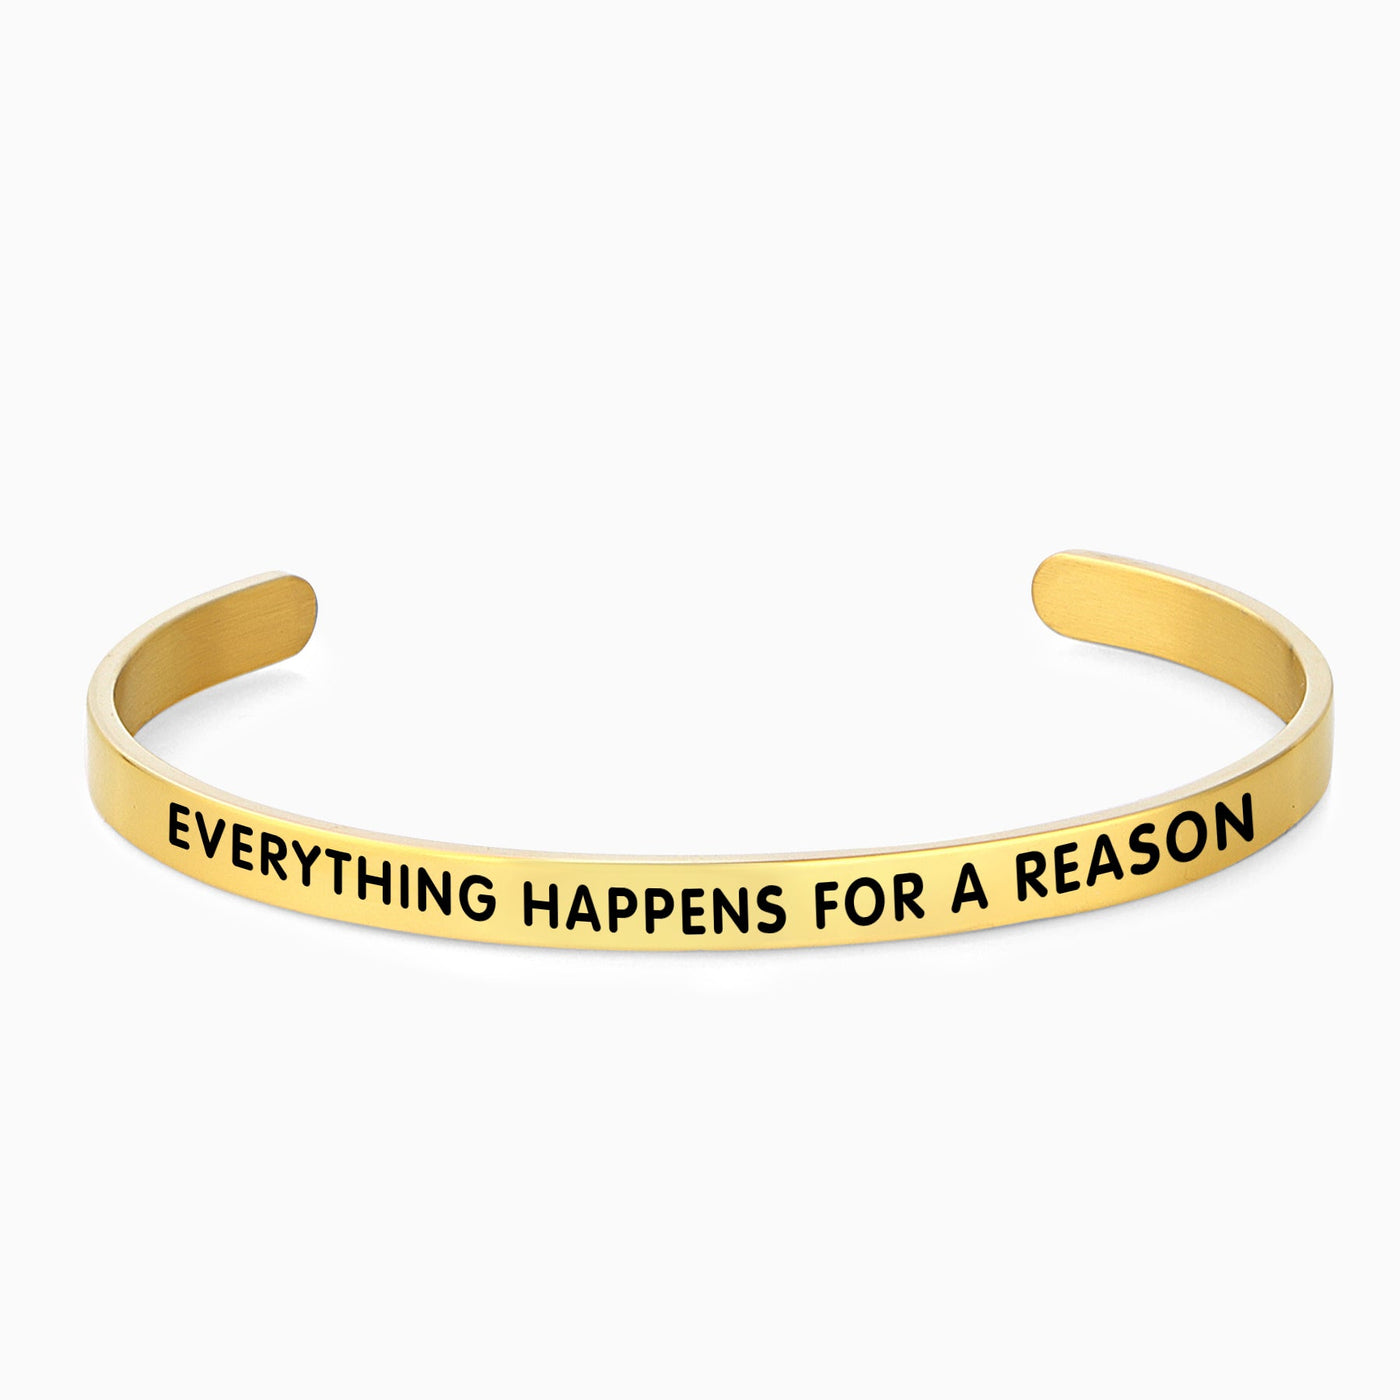 EVERYTHING HAPPENS FOR A REASON - OTANTO